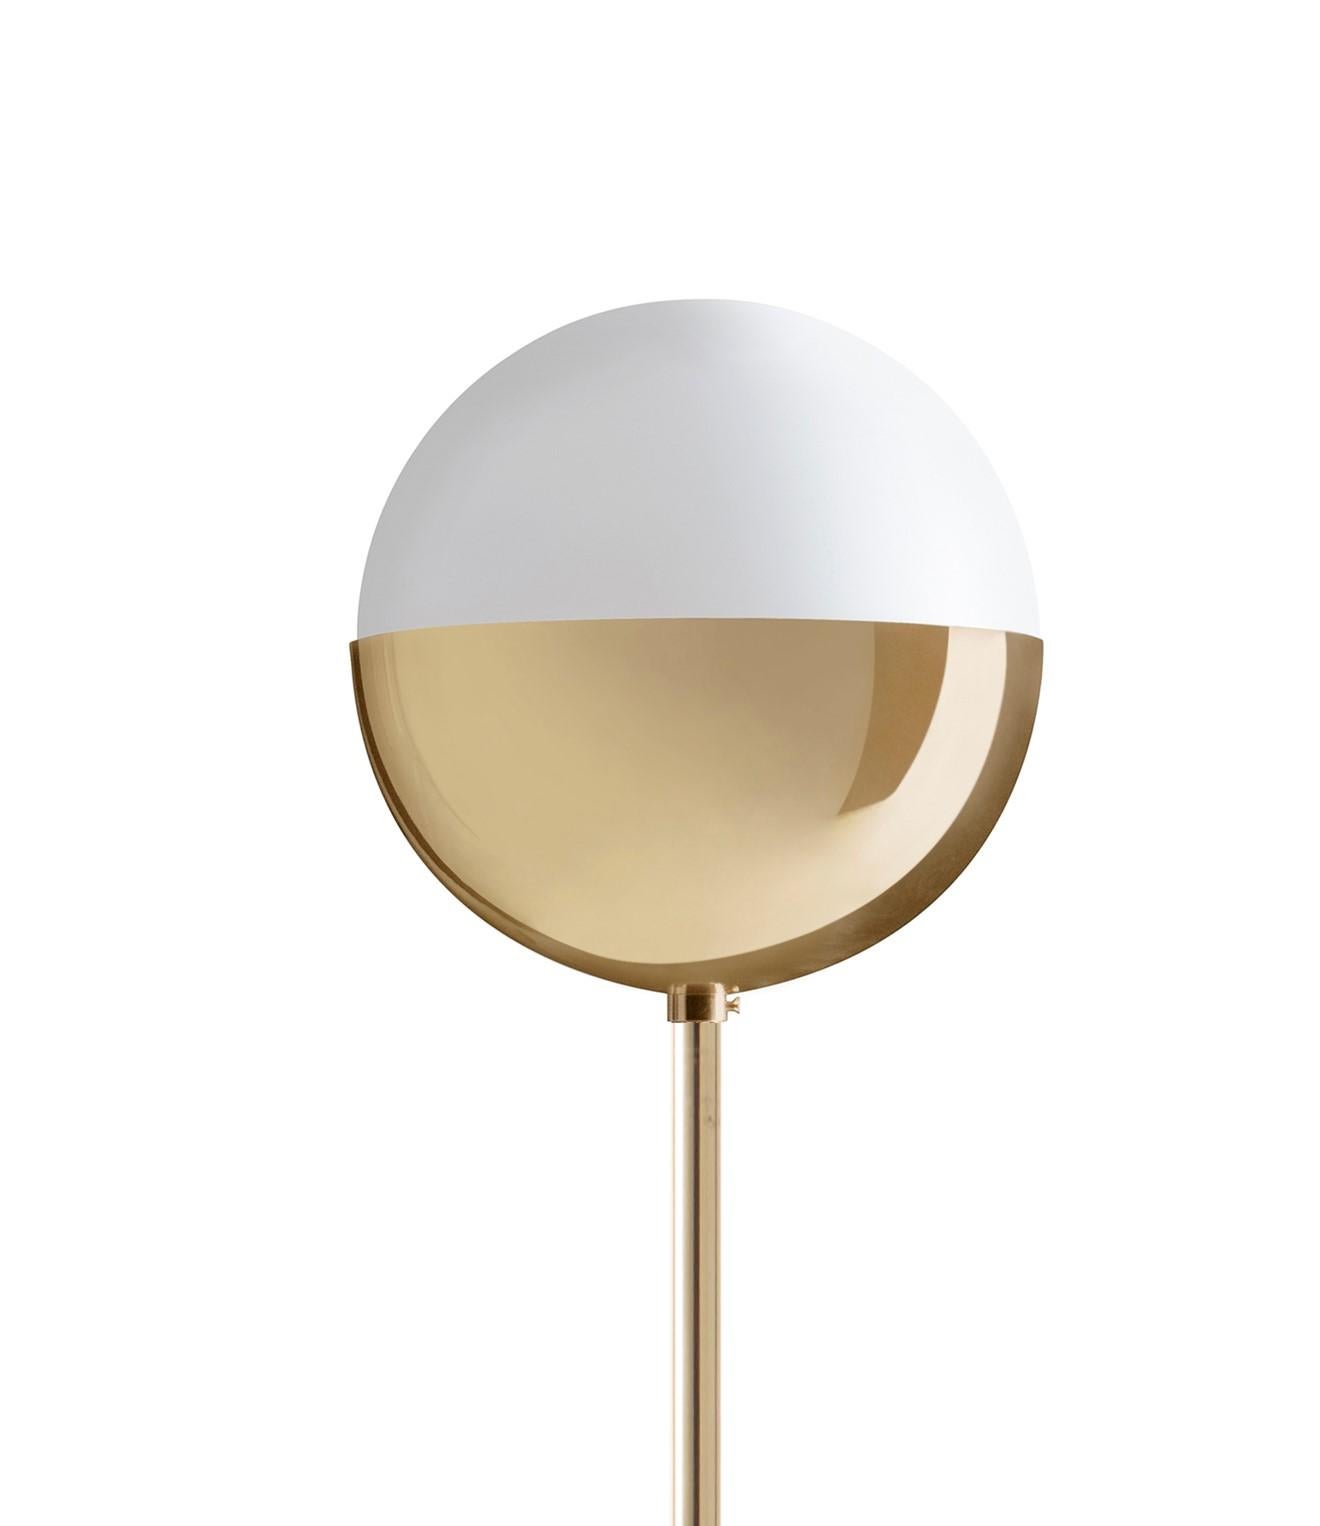 Brass floor lamp 01 by Magic Circus Editions
Dimensions: D 25 x H 140 cm
Materials: Brass base, smooth brass tube, glossy mouth blown glass
Dimmable version available.


Rethinking, reimagining, redesigning familiar objects that we look at